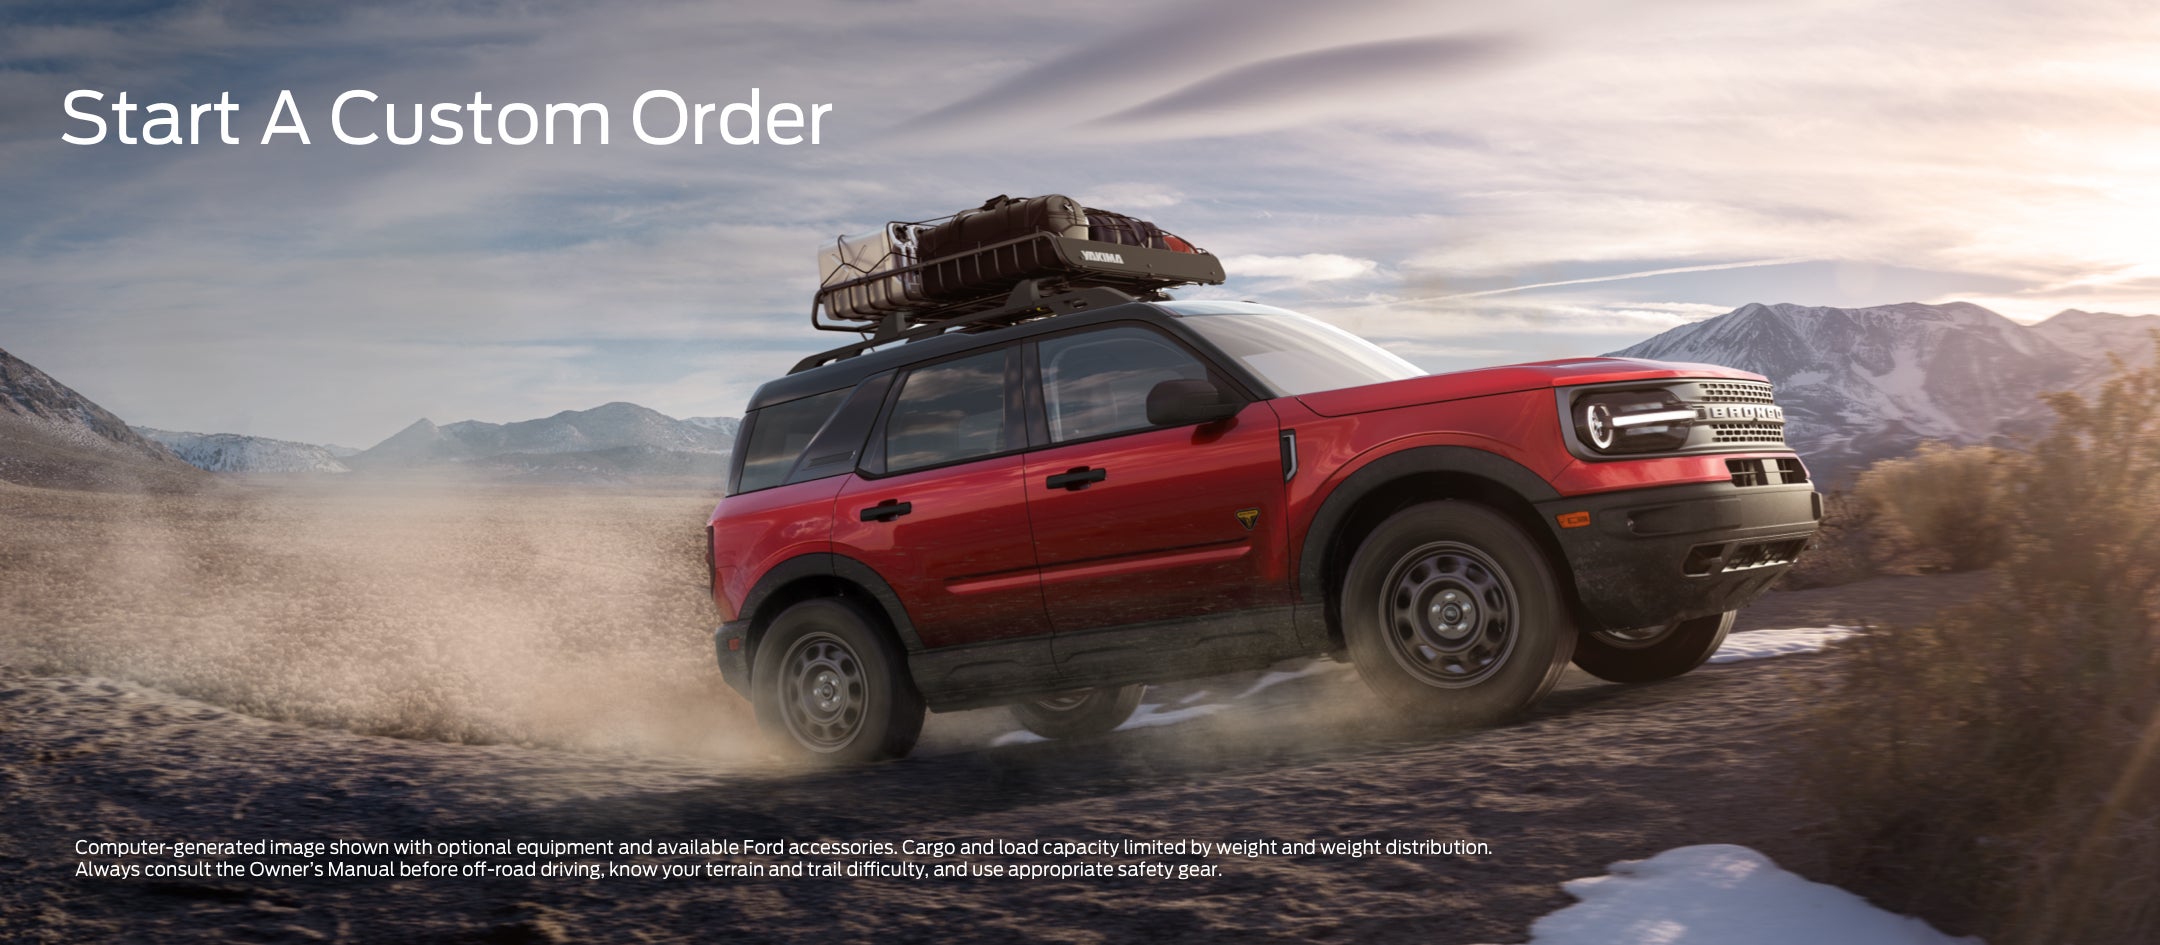 Start a custom order | Westlie Ford in Minot ND